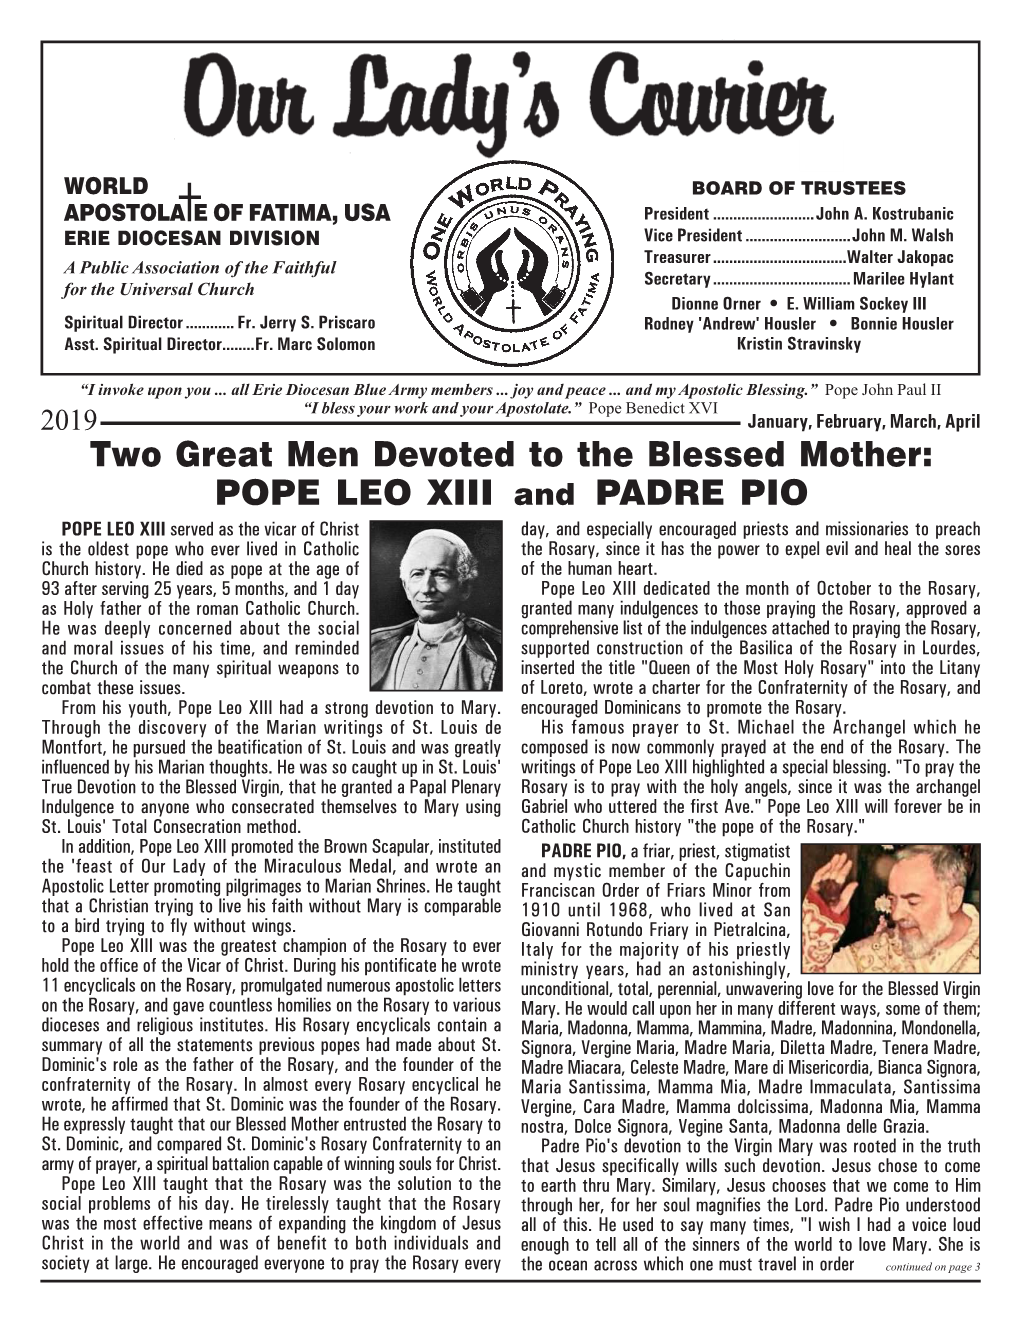 Pope Leo XIII and Padre